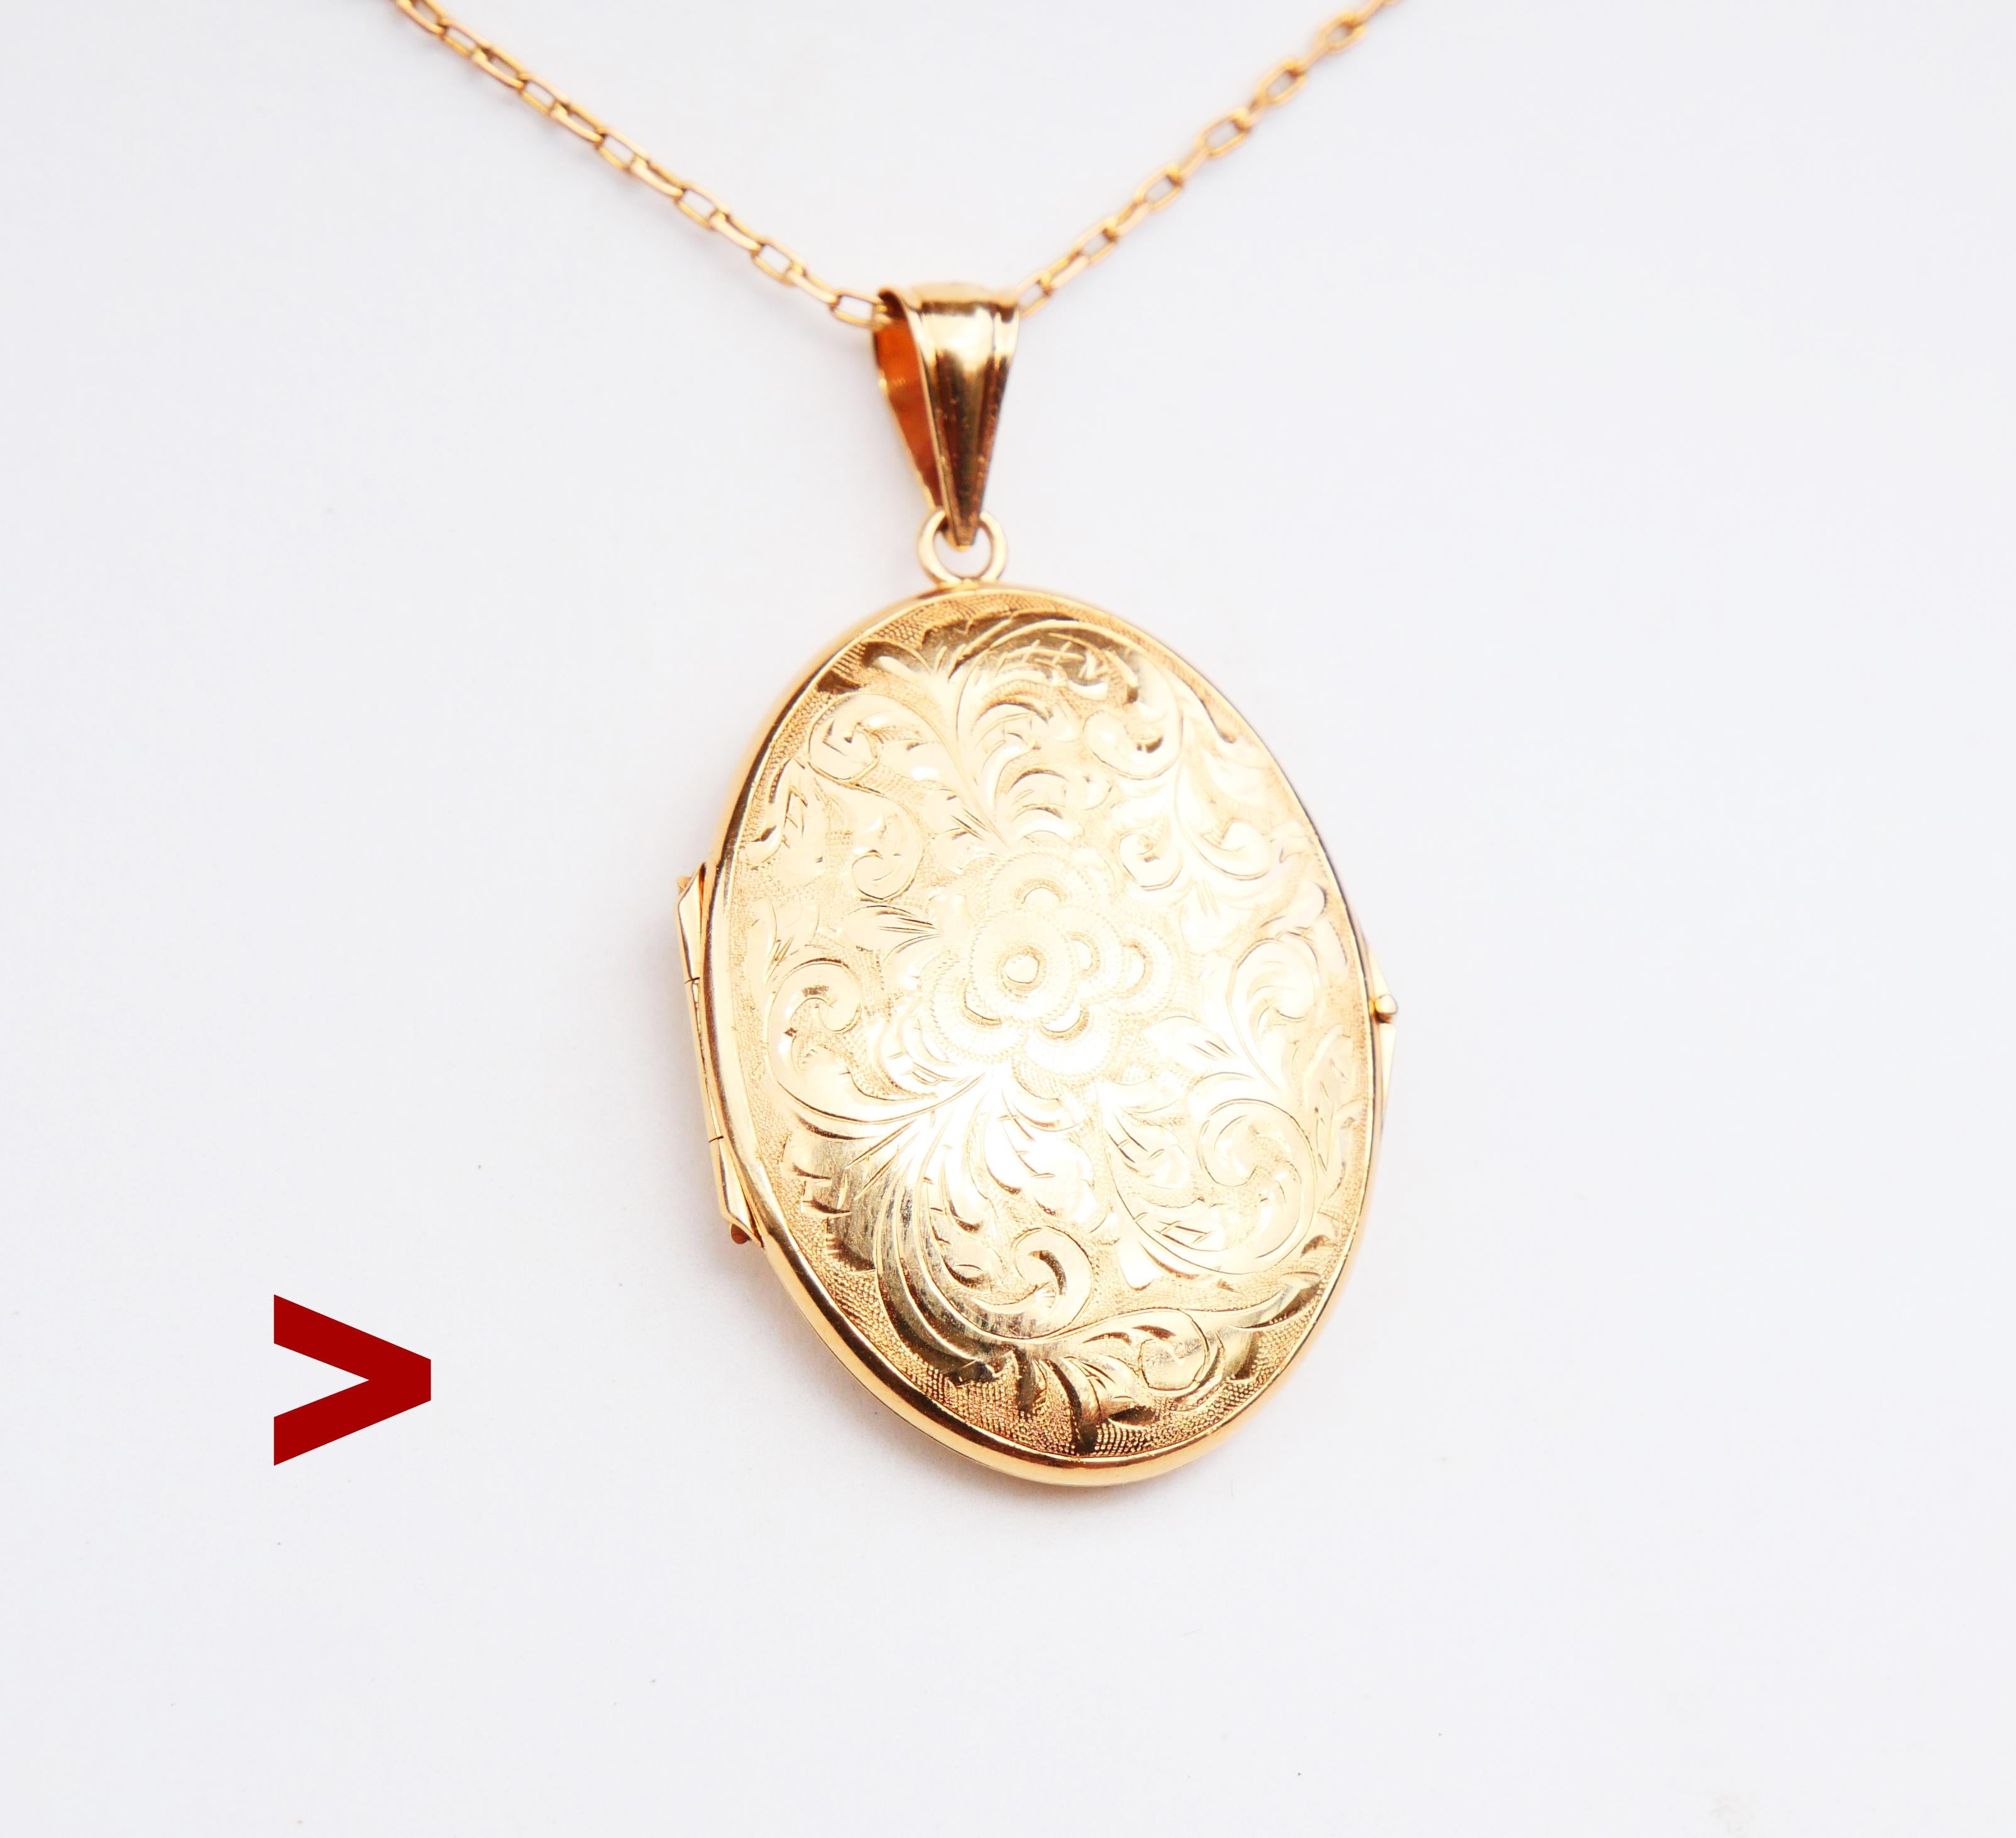 Hand-made in 18K Gold - Pendant / Locket with hand-engraved ornaments of Greek Key on both sides. Made in solid 18K Yellow Gold. One internal removable bezel inside, no glass. All parts tested 18K Yellow Gold. Bail with worn Swedish XIX cent